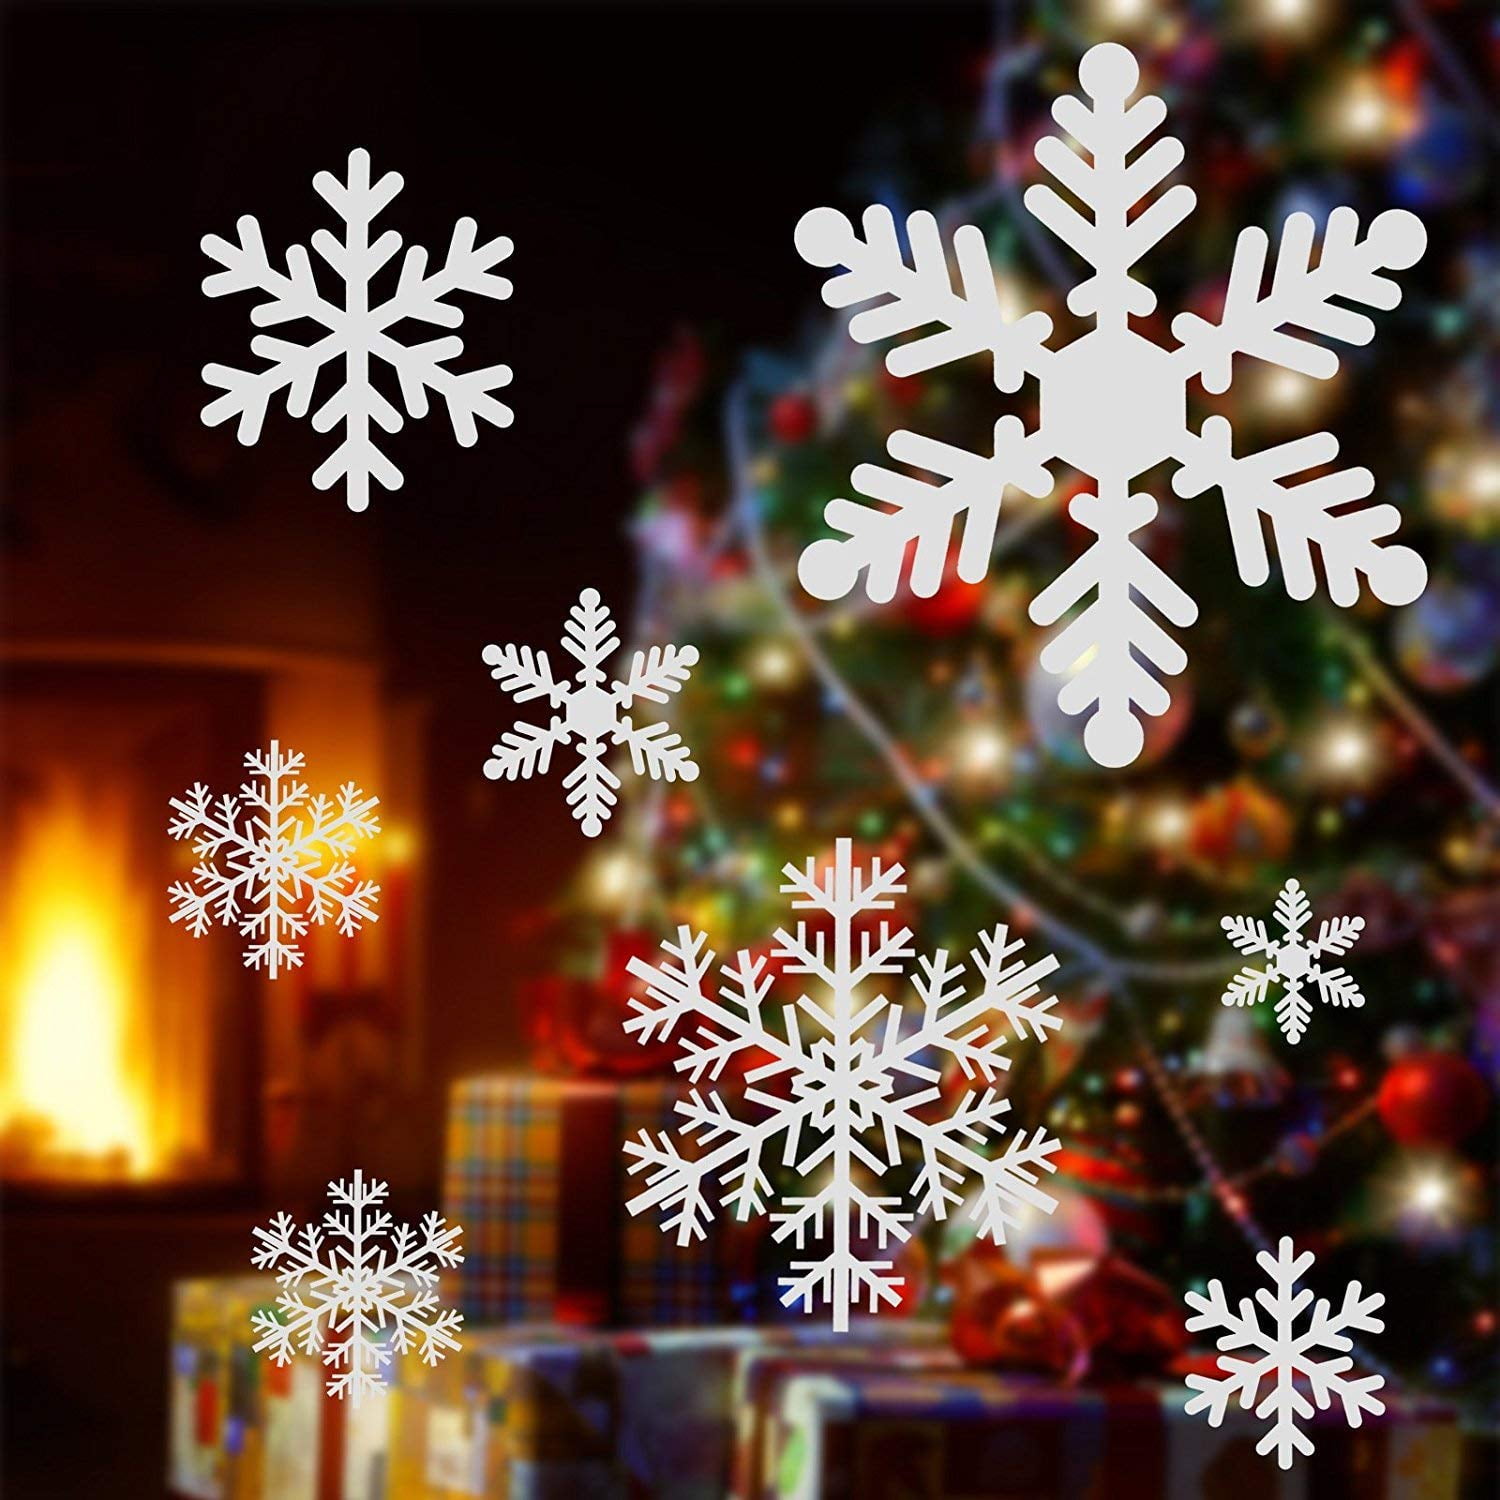 Xmmswdla Snowflakes Window Decorations Clings Decal Stickers Ornaments for Christmas Frozen Theme Party New Year Suppliesstickers for Kids, Size: 30